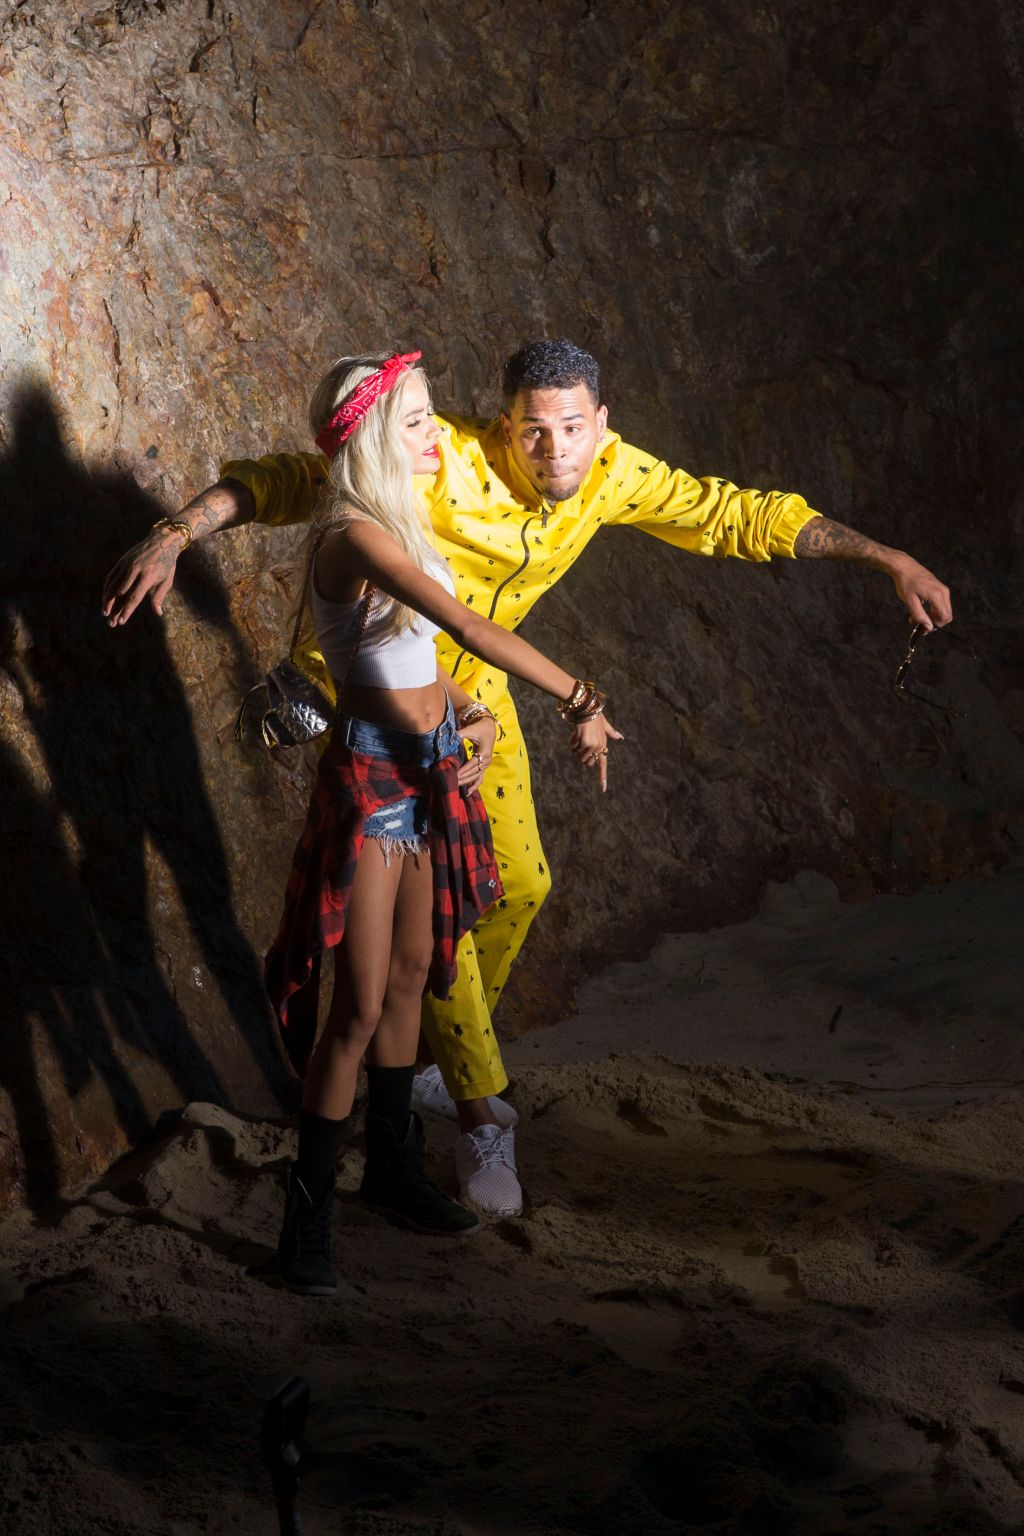 Chris Brown dances on the sand while shooting 'Do It Again' video in Malibu.